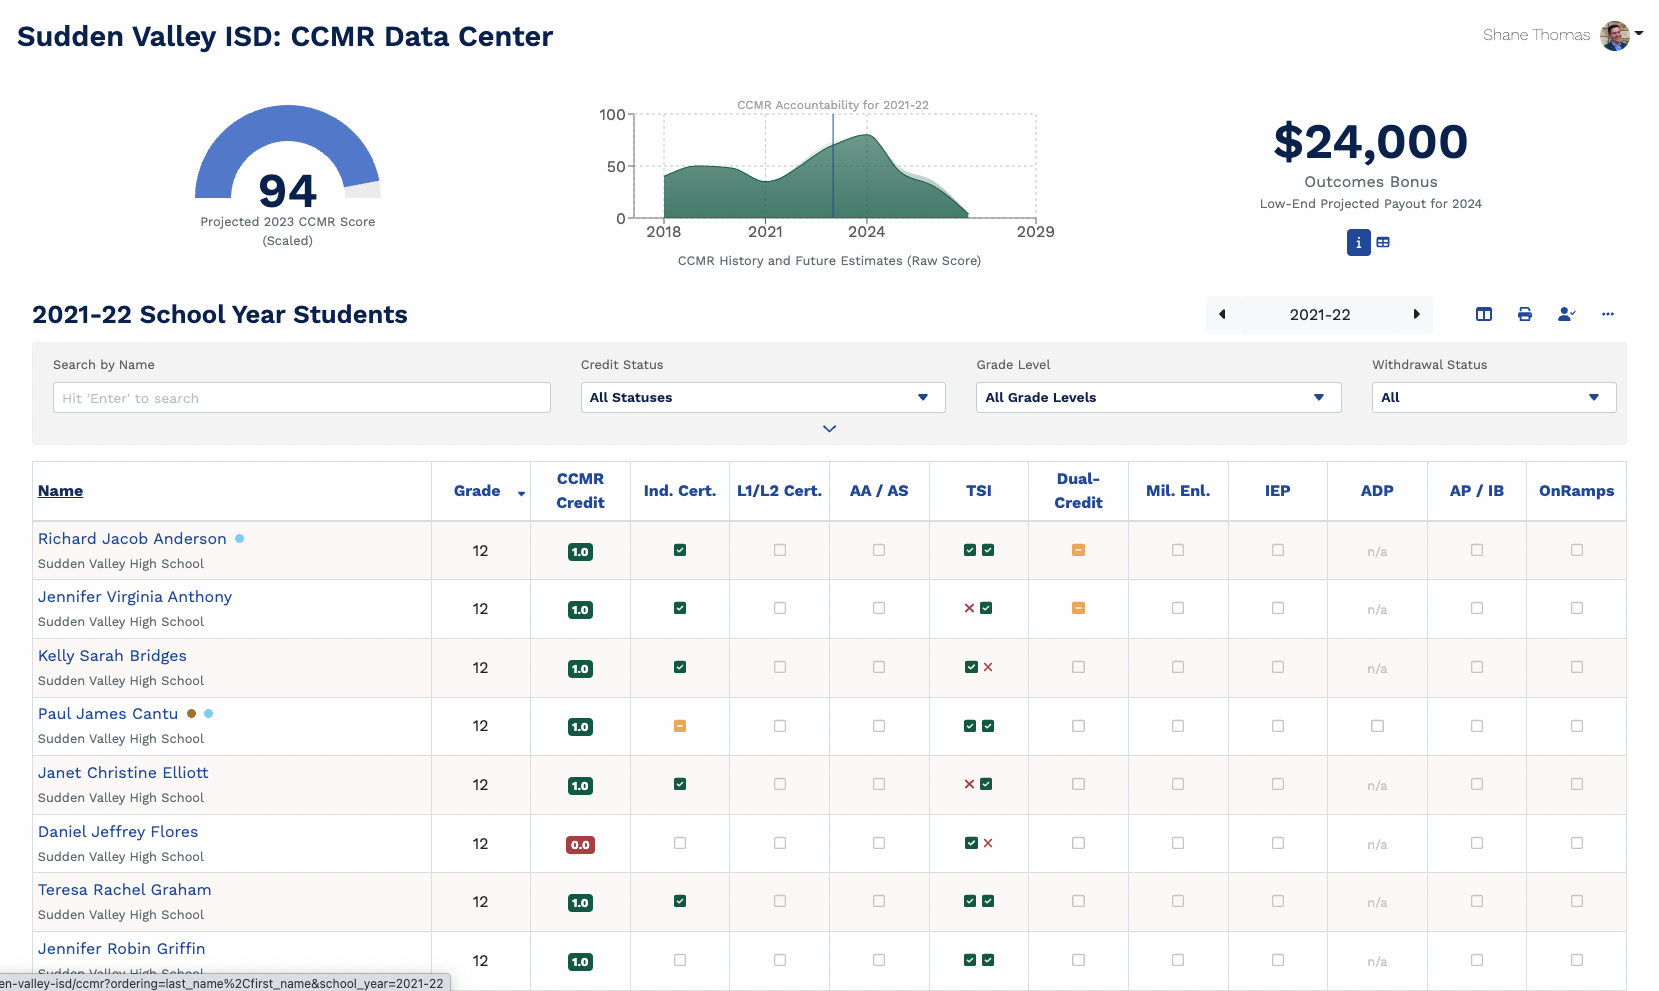 Image of CareerCraft’s CCMR Data Center dashboard. CCMR scores and projected CCMR Outcomes Bonus money is shown.